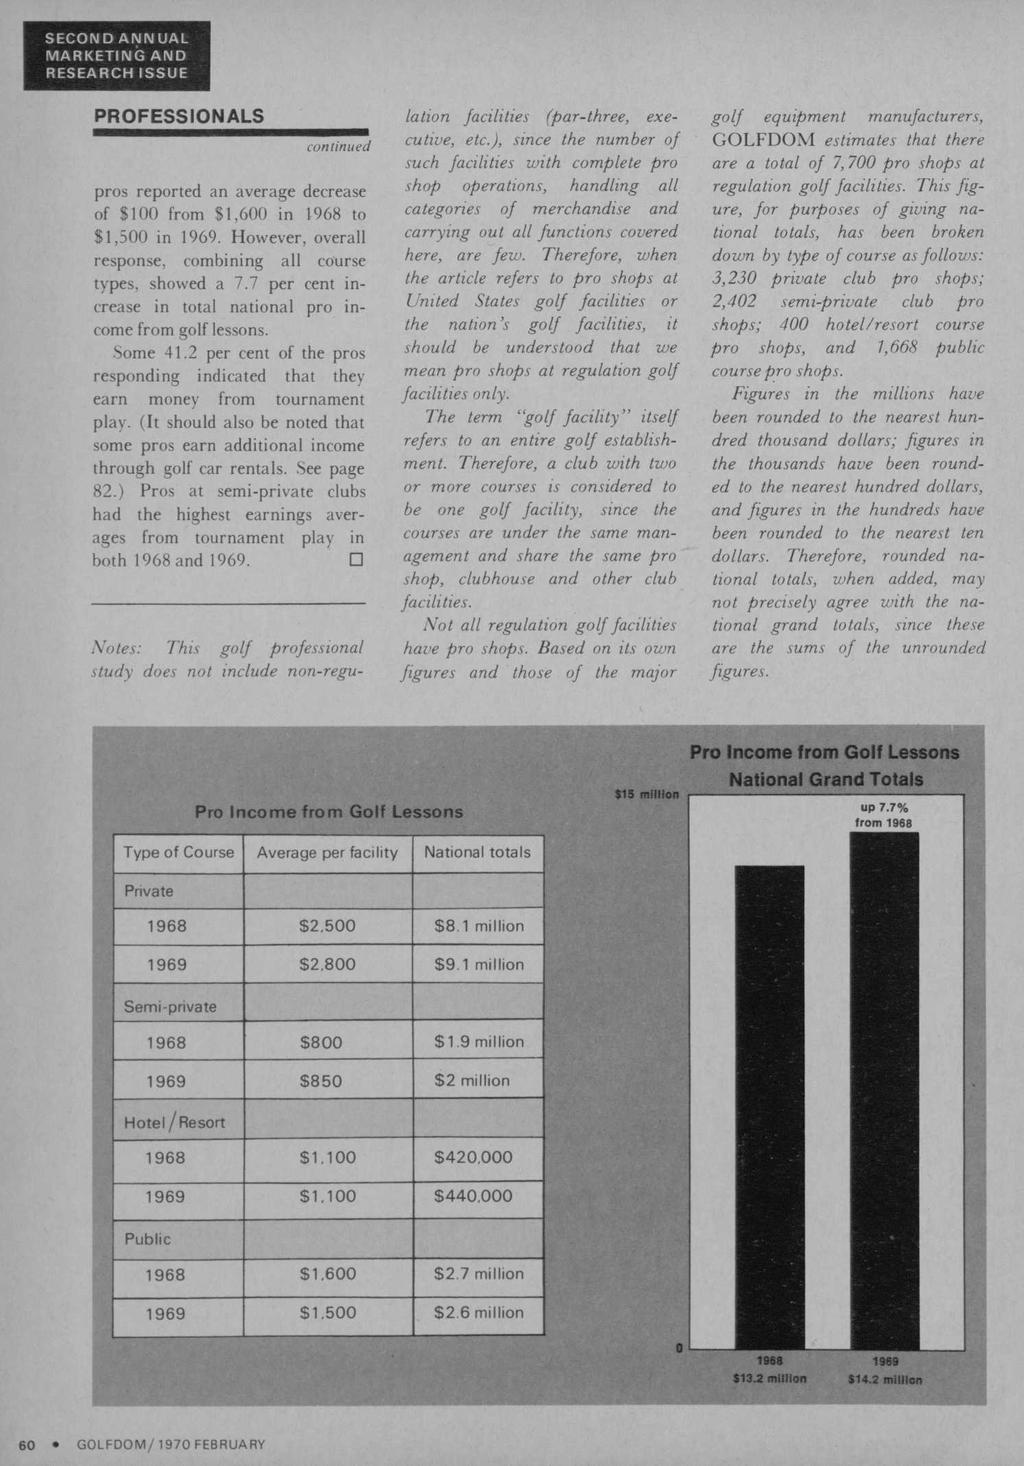 SECOND ANNUAL MARKETING AND RESEARCH ISSUE PROFESSIONALS pros reported an average decrease of $100 from $1,600 in 1968 to $1,500 in 1969.